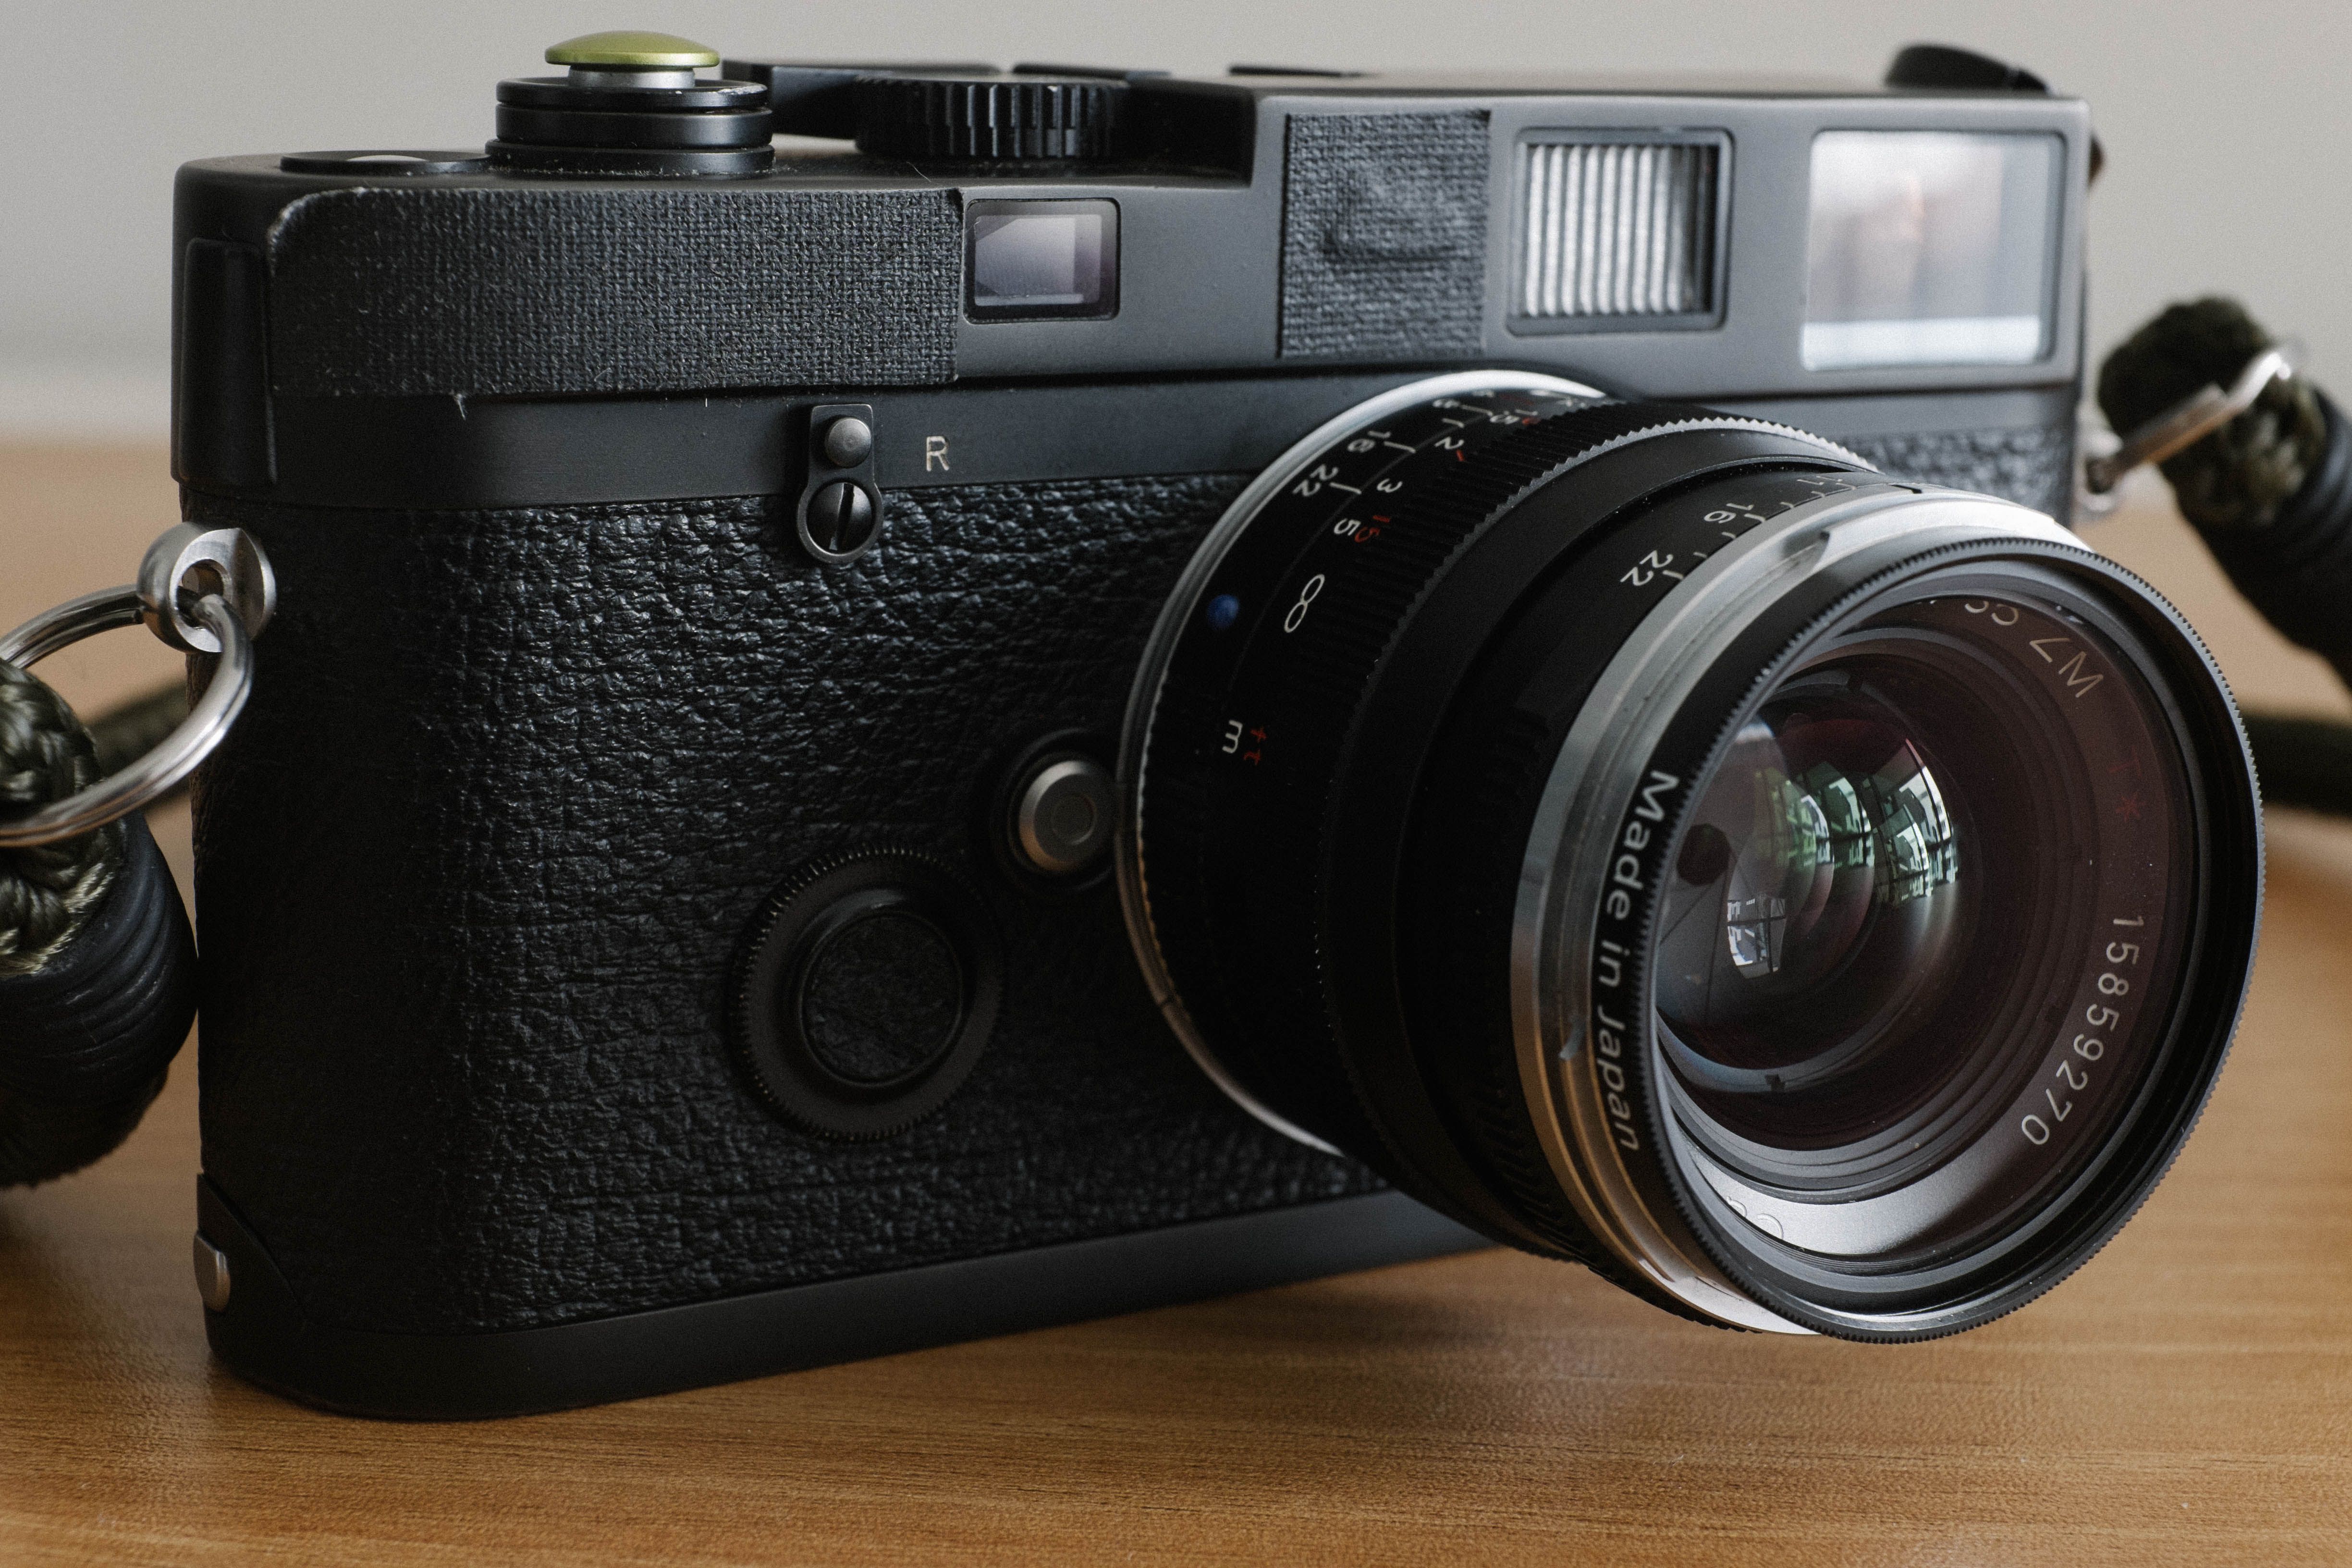 The New Leica M6 - Hot Or Not? - StreetShootr